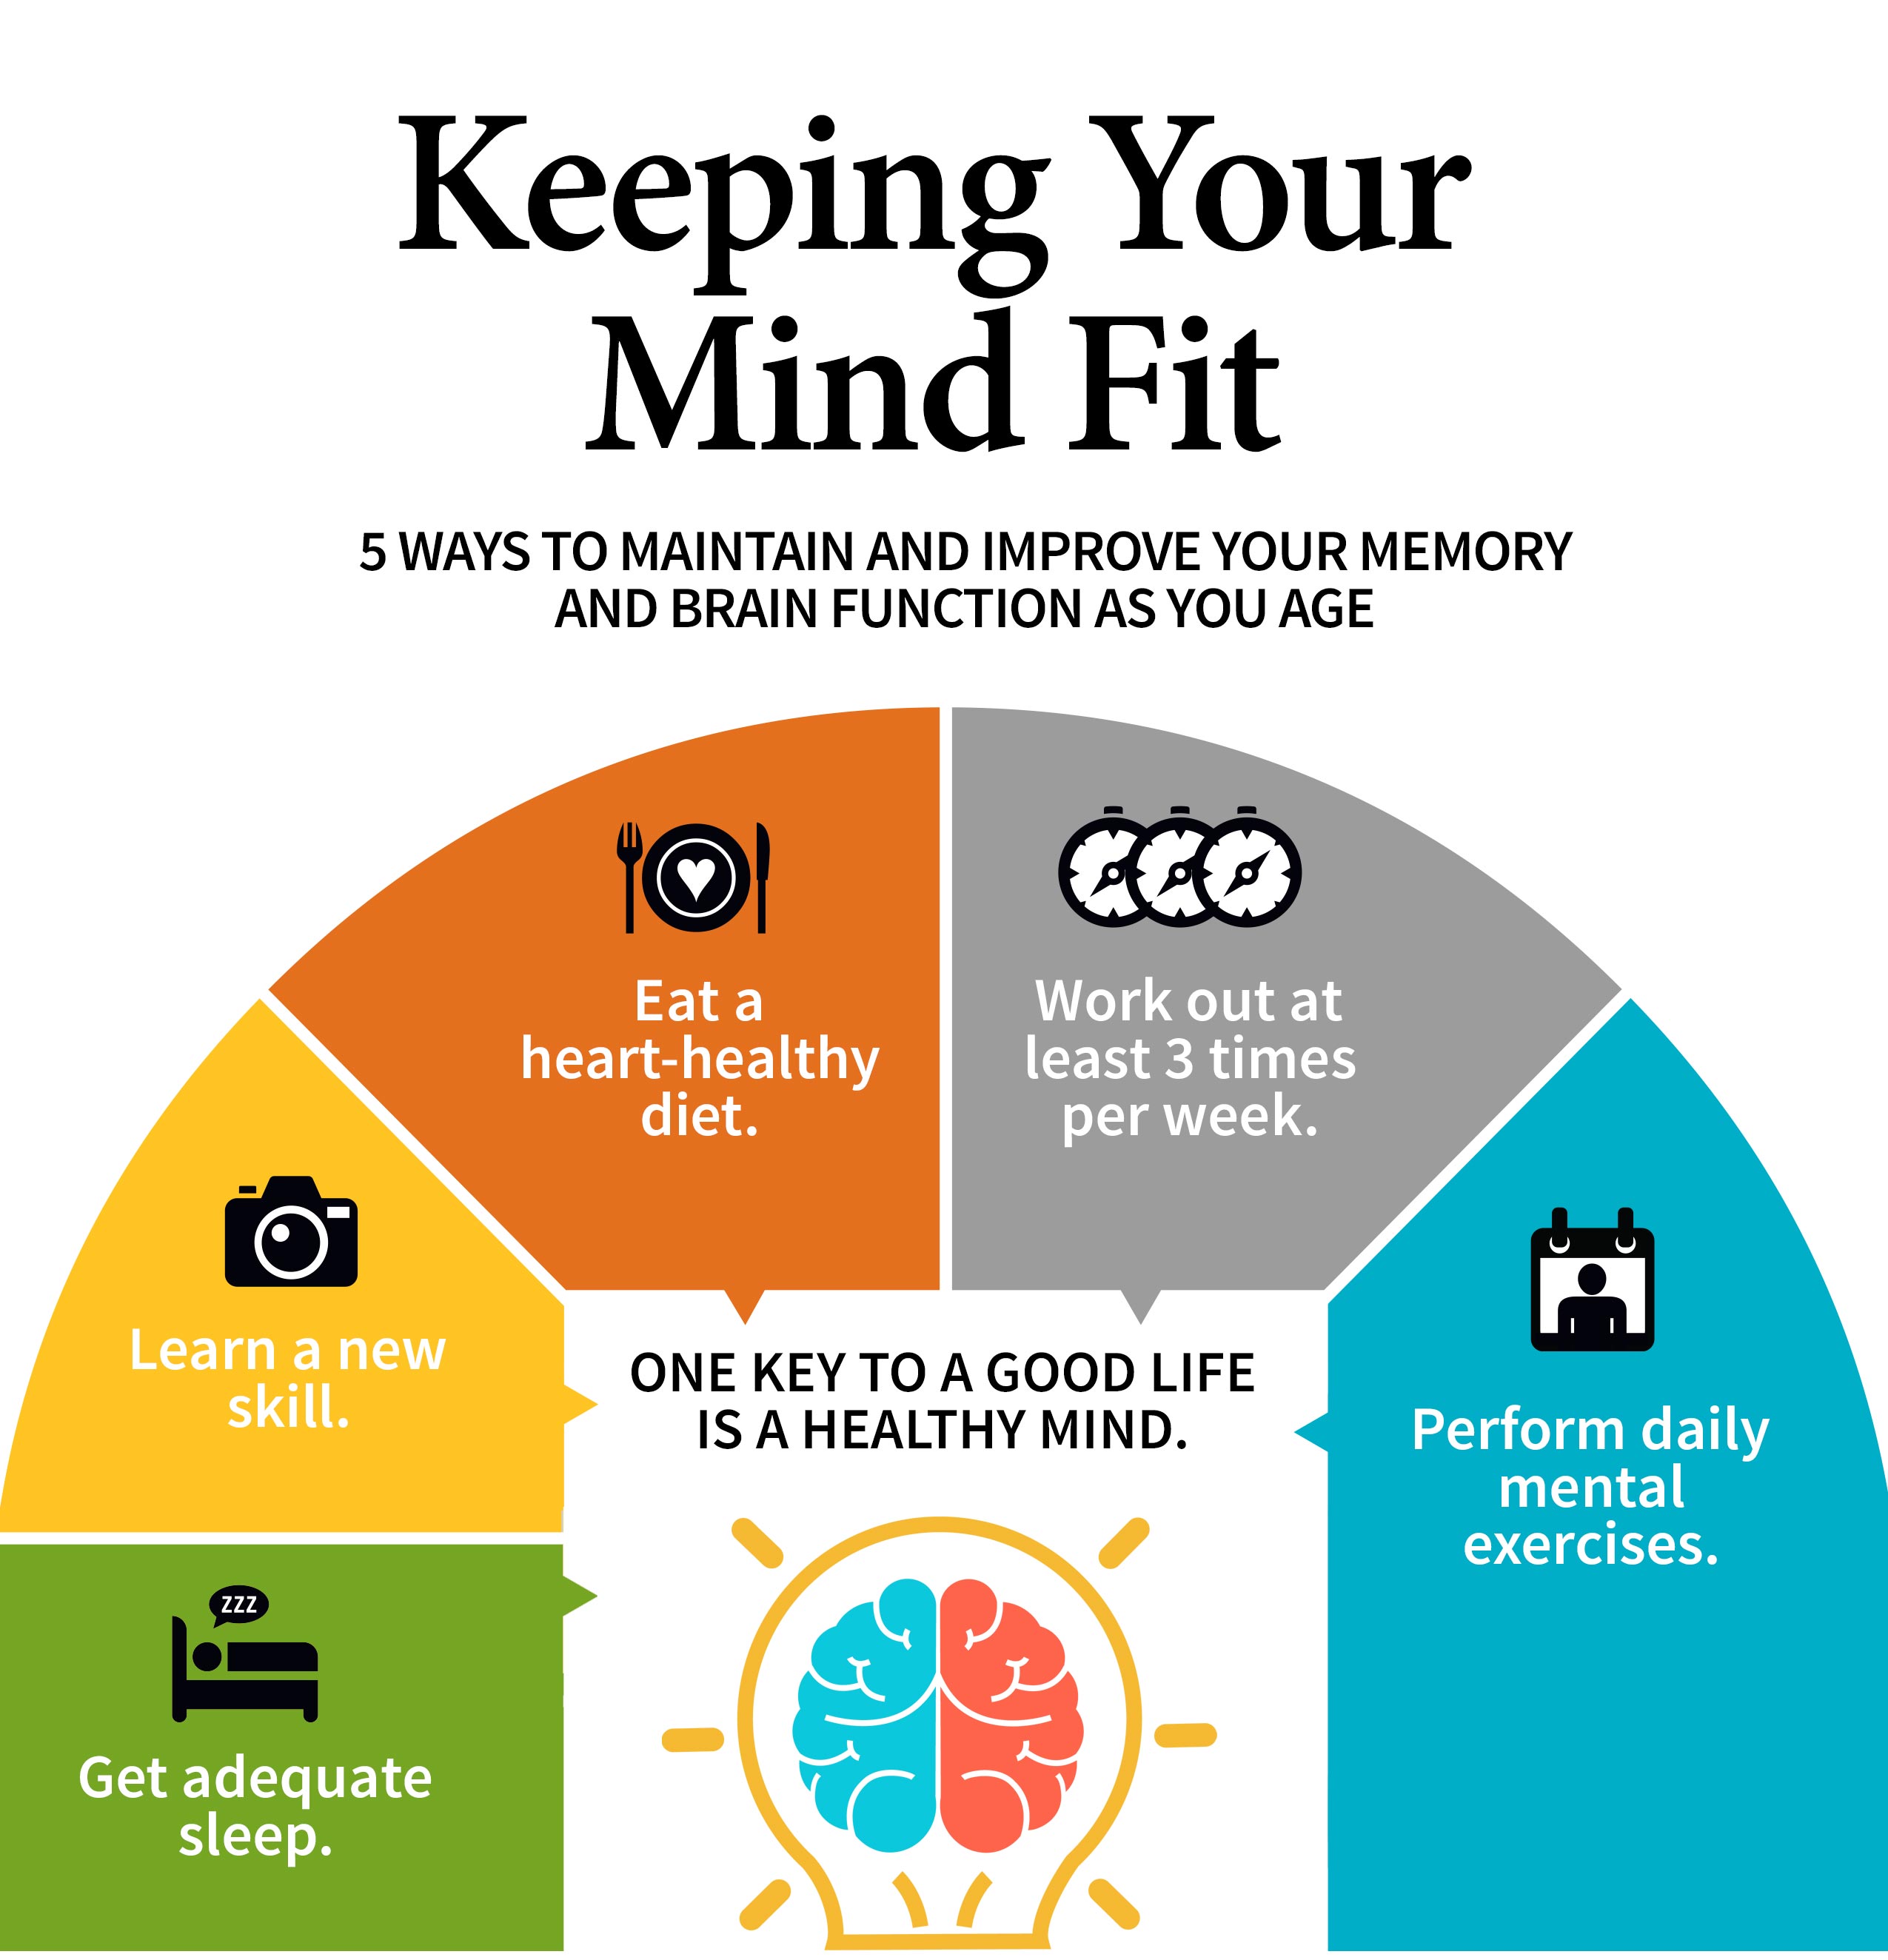 Keeping you mind fit infographic